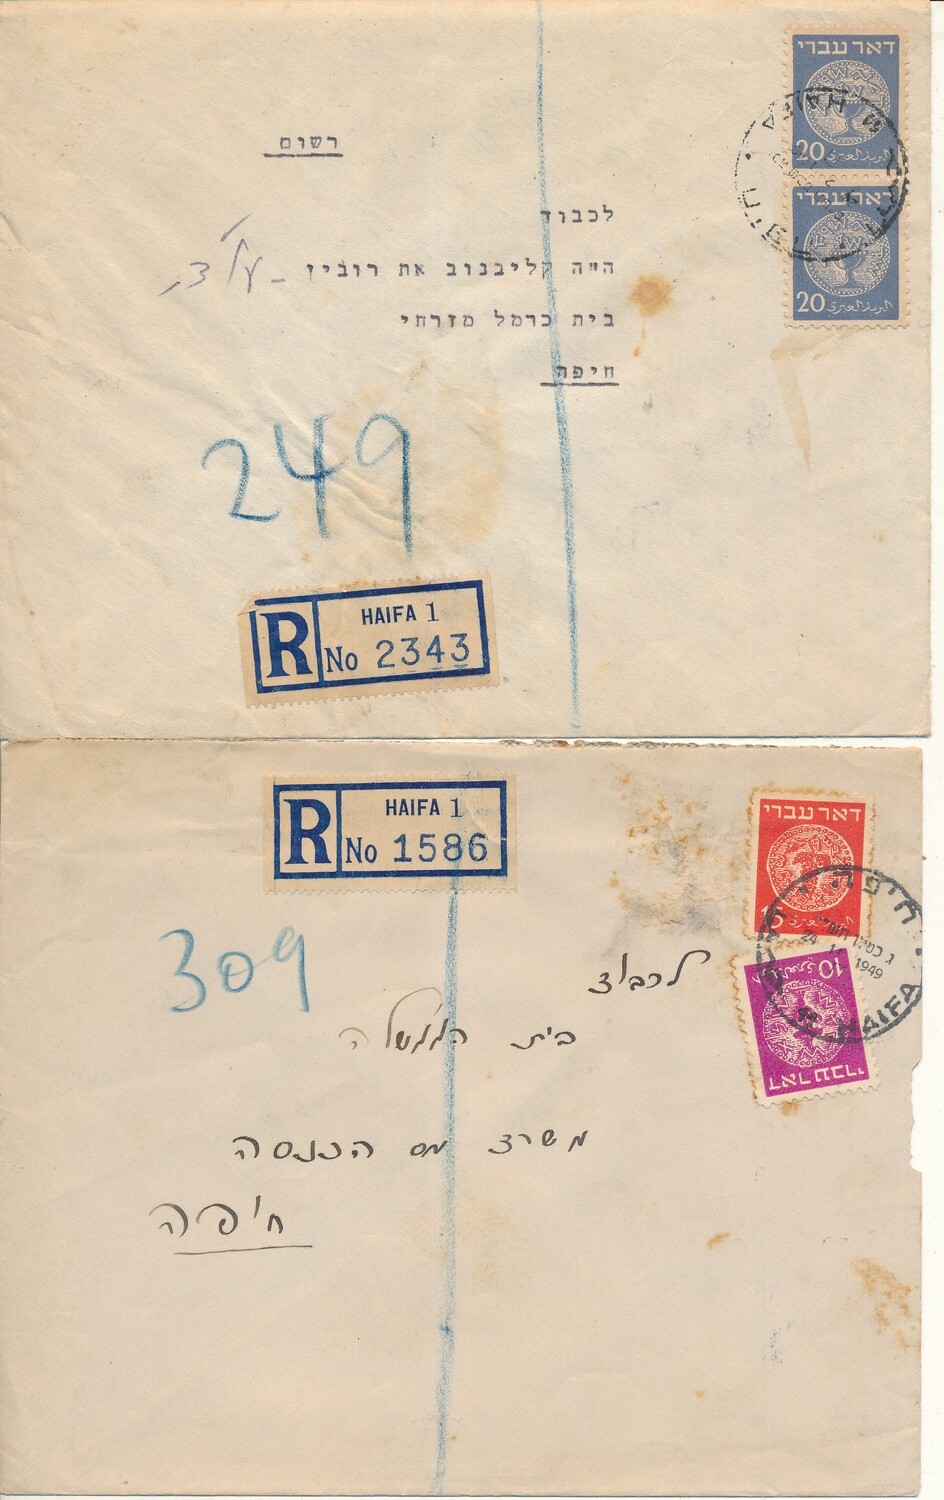 ISRAEL 1948 SET OF 2 REGISTERED COVERS WITH DOAR IVRI STAMPS # 3